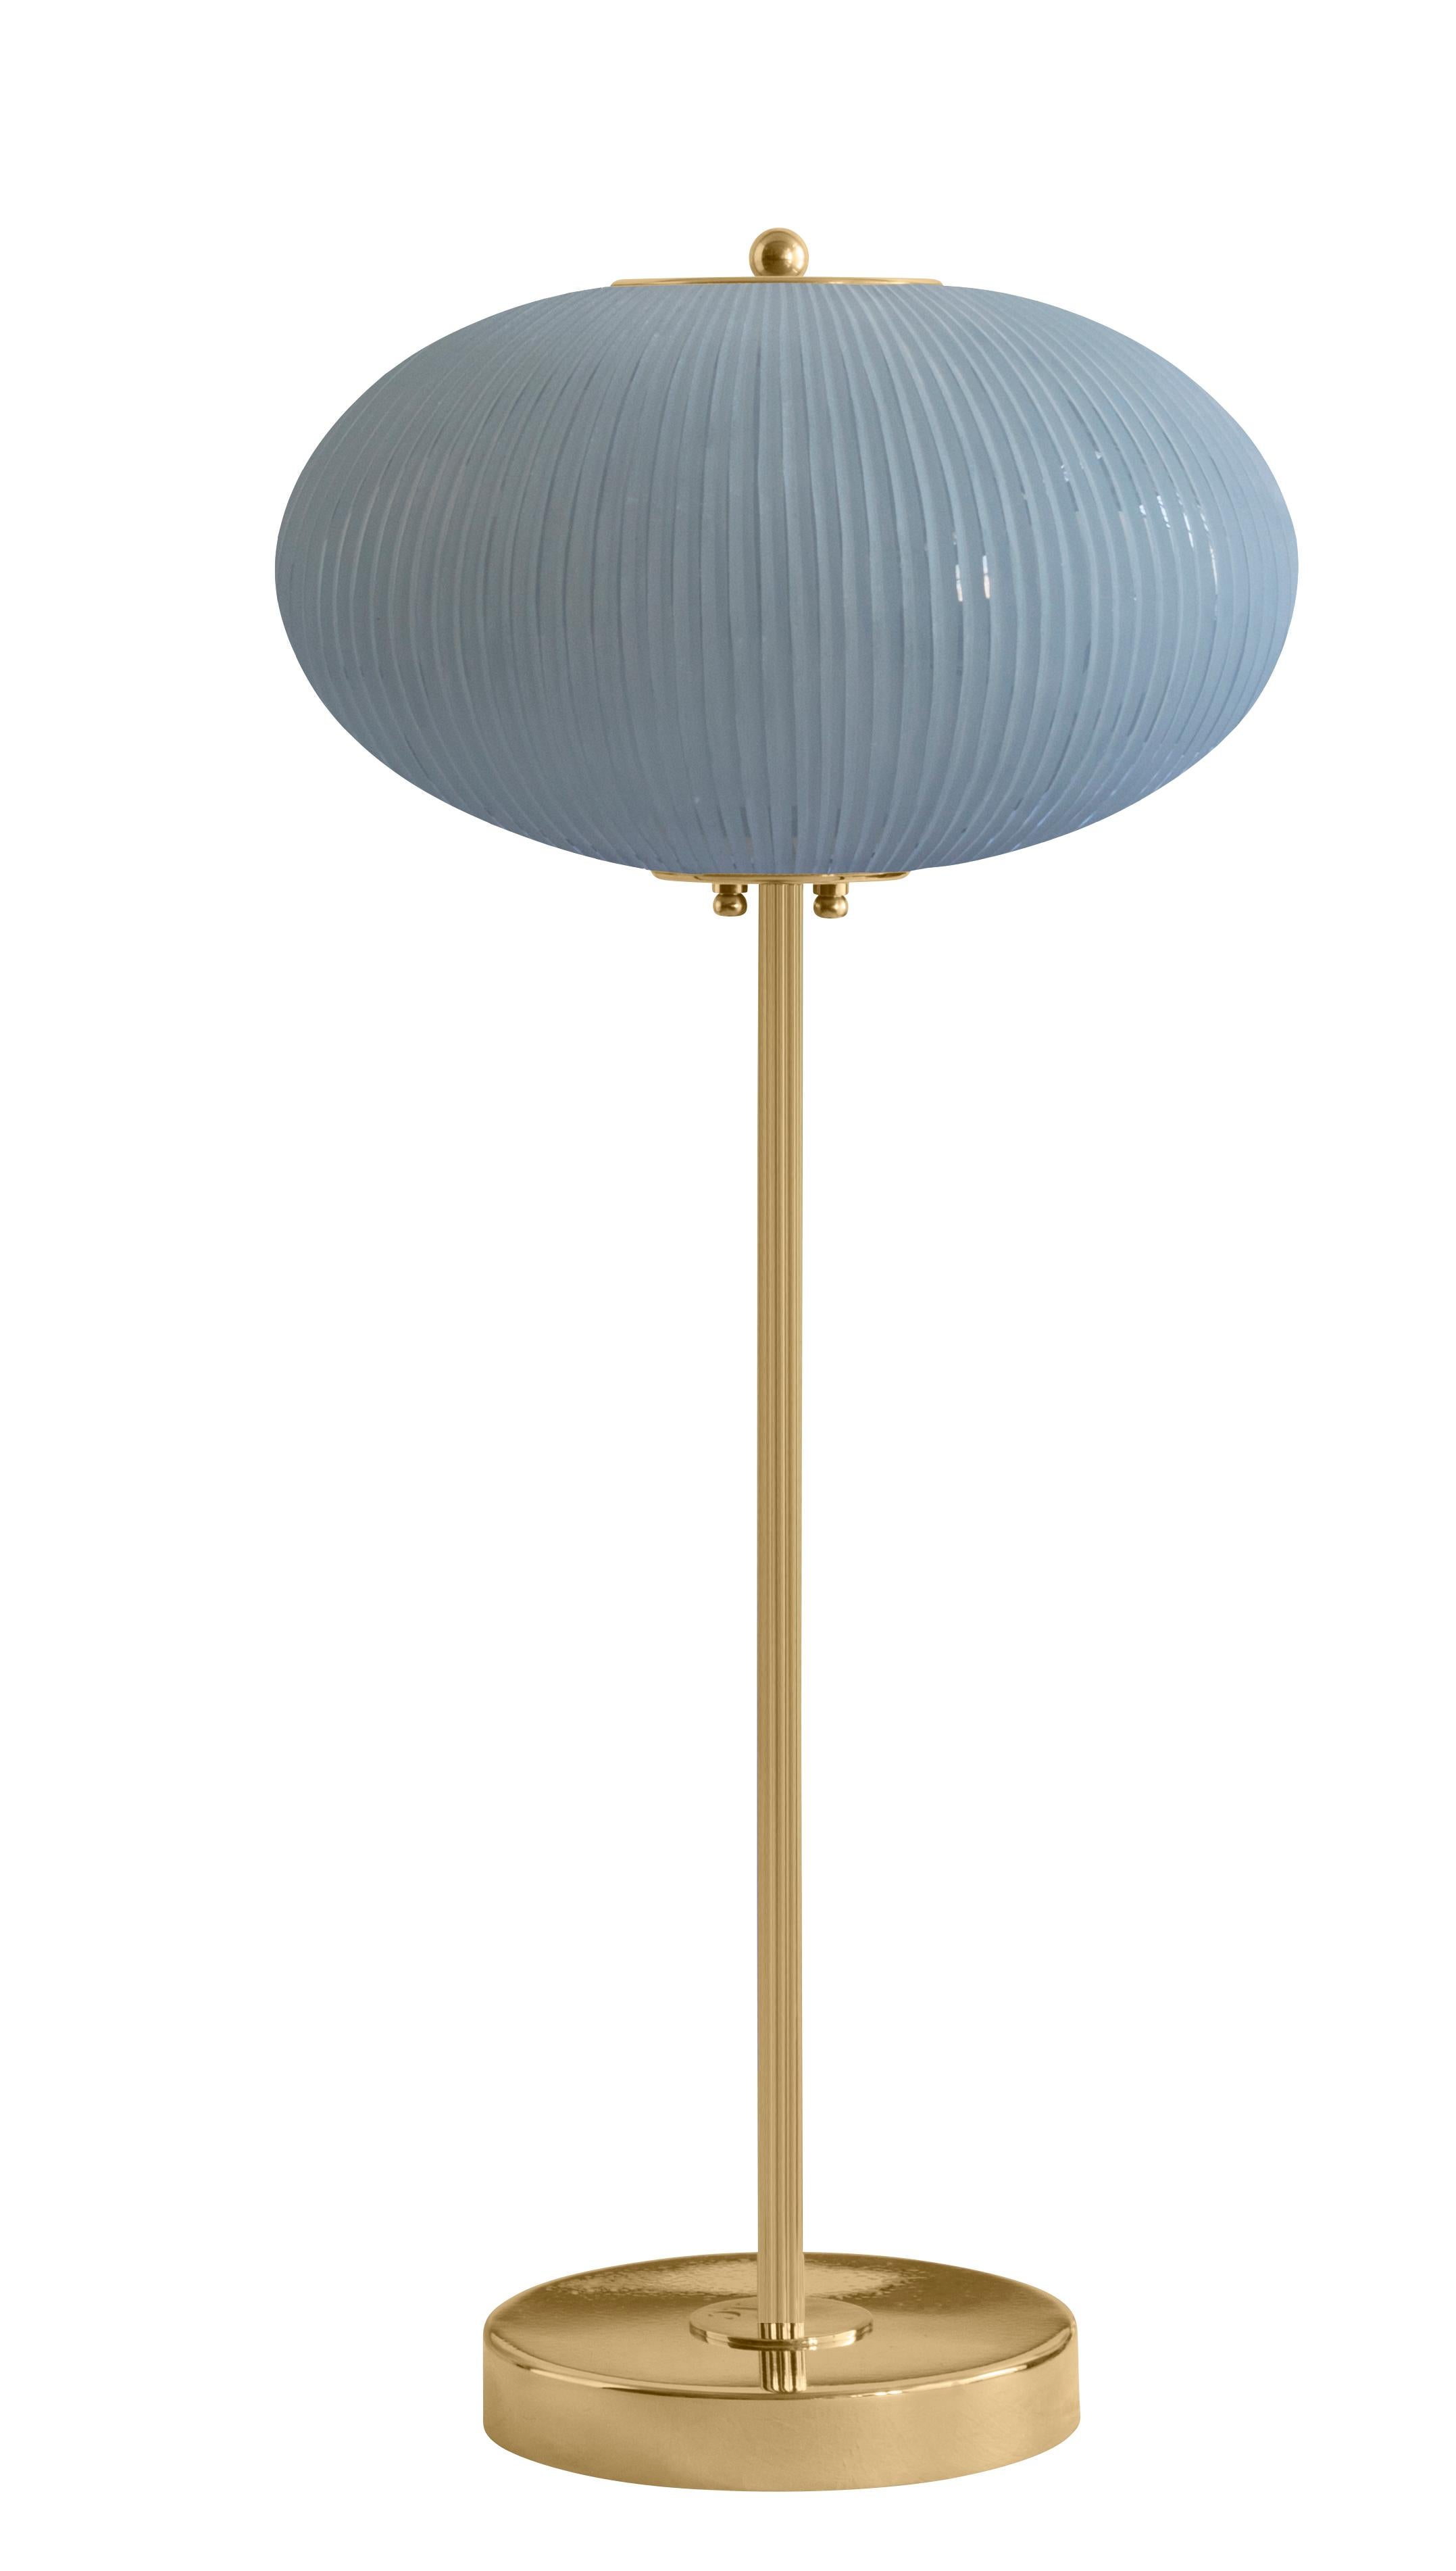 Table lamp China 07 by Magic Circus Editions
Dimensions: H 70 x W 32 x D 32 cm
Materials: Brass, mouth blown glass sculpted with a diamond saw
Colour: opal grey

Available finishes: Brass, nickel
Available colours: enamel soft white, soft